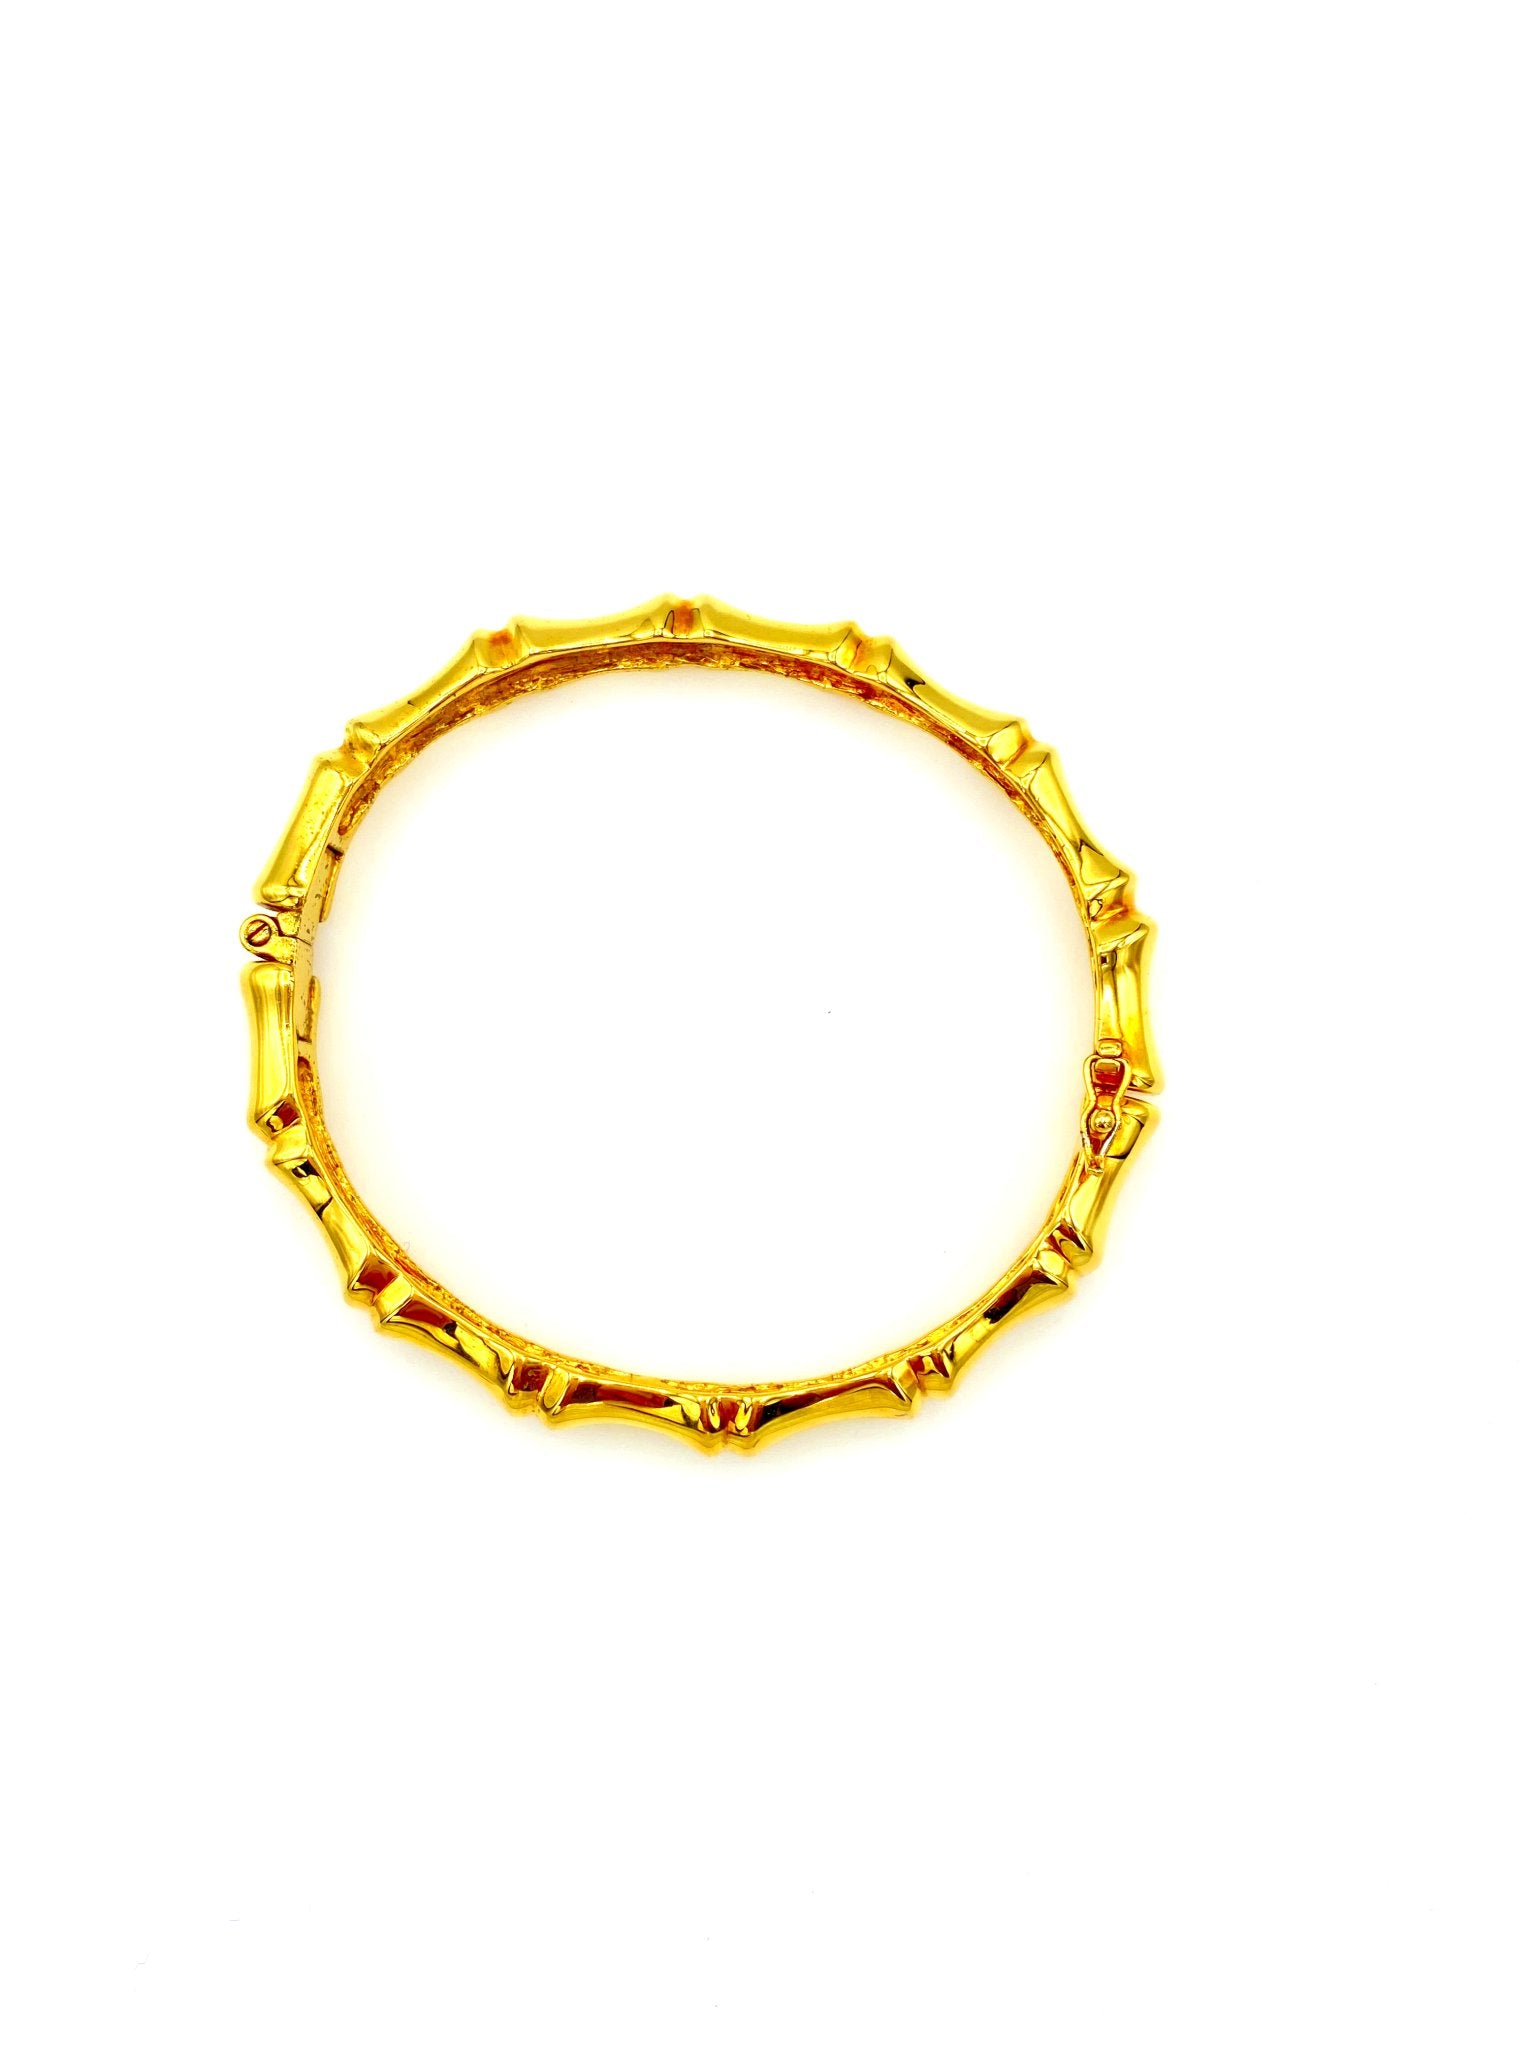 Mens Eternal Classics Twin Wide Link 24k Gold Bracelet With 18K Tibetan  Bow, Yellow Solid FINE, And G/F Gold Accents From Qilin2021, $7.11 |  DHgate.Com